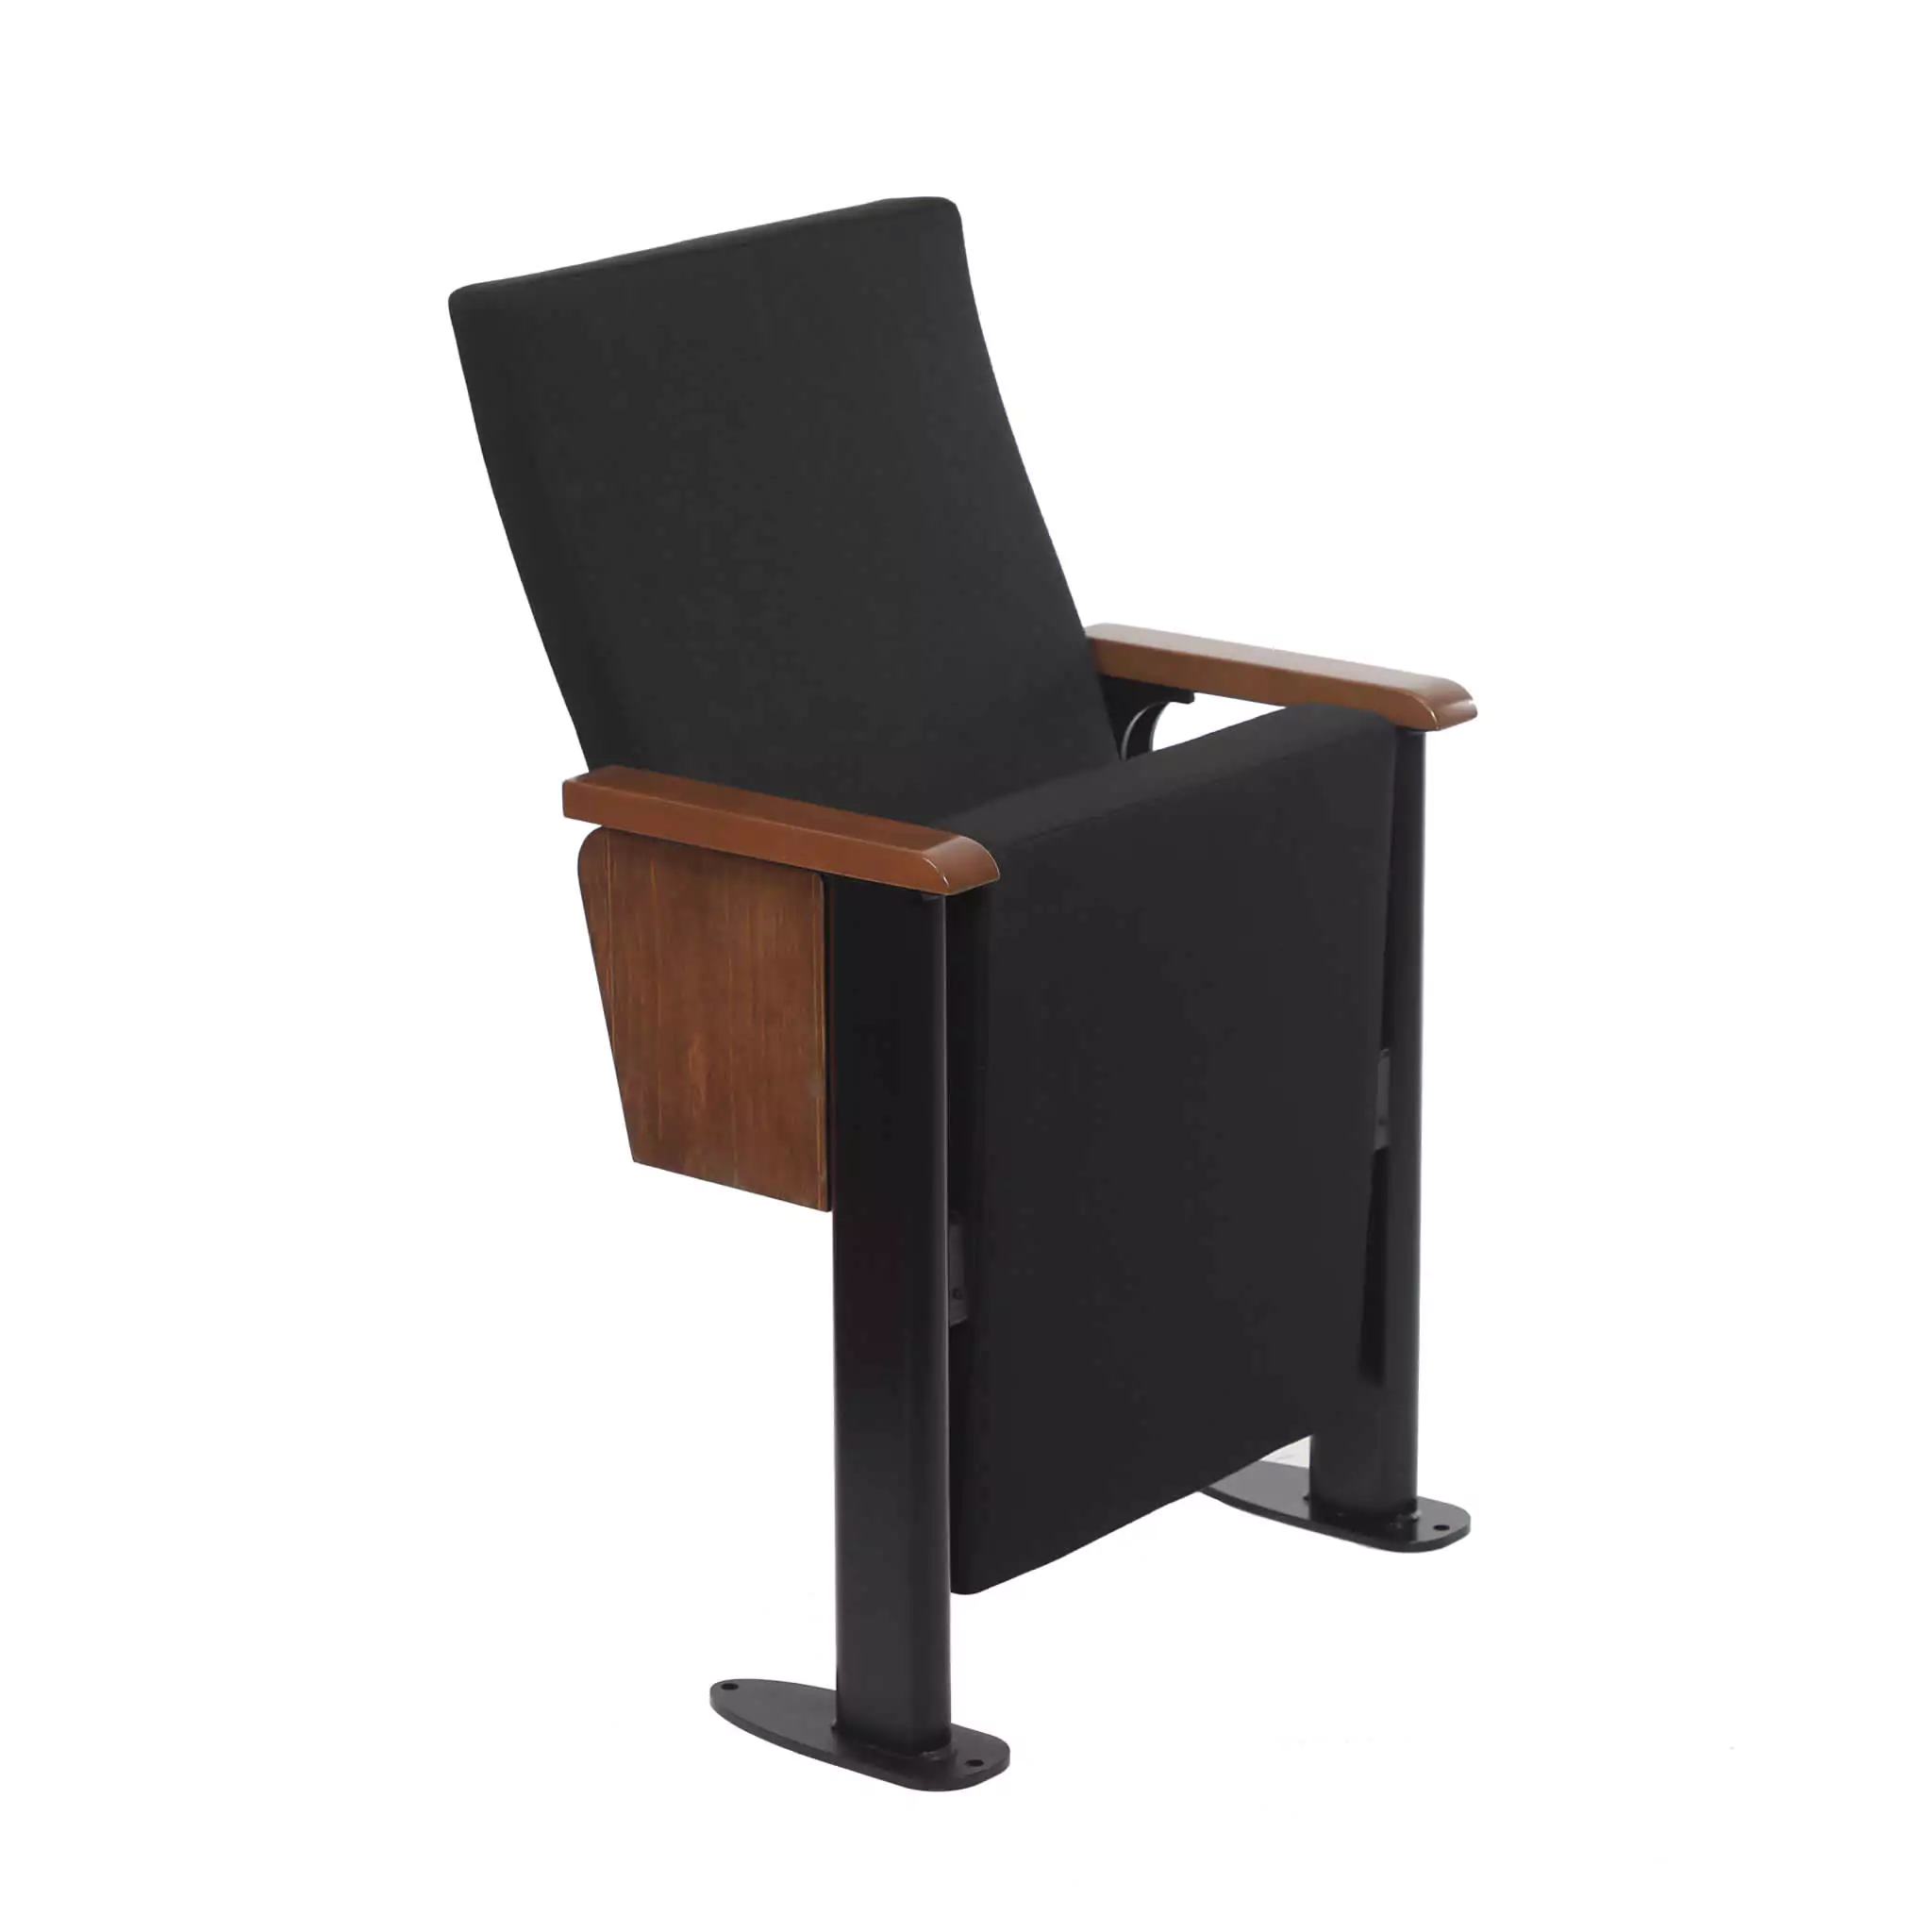 Simko Seating Product Conference Seat Porto 01